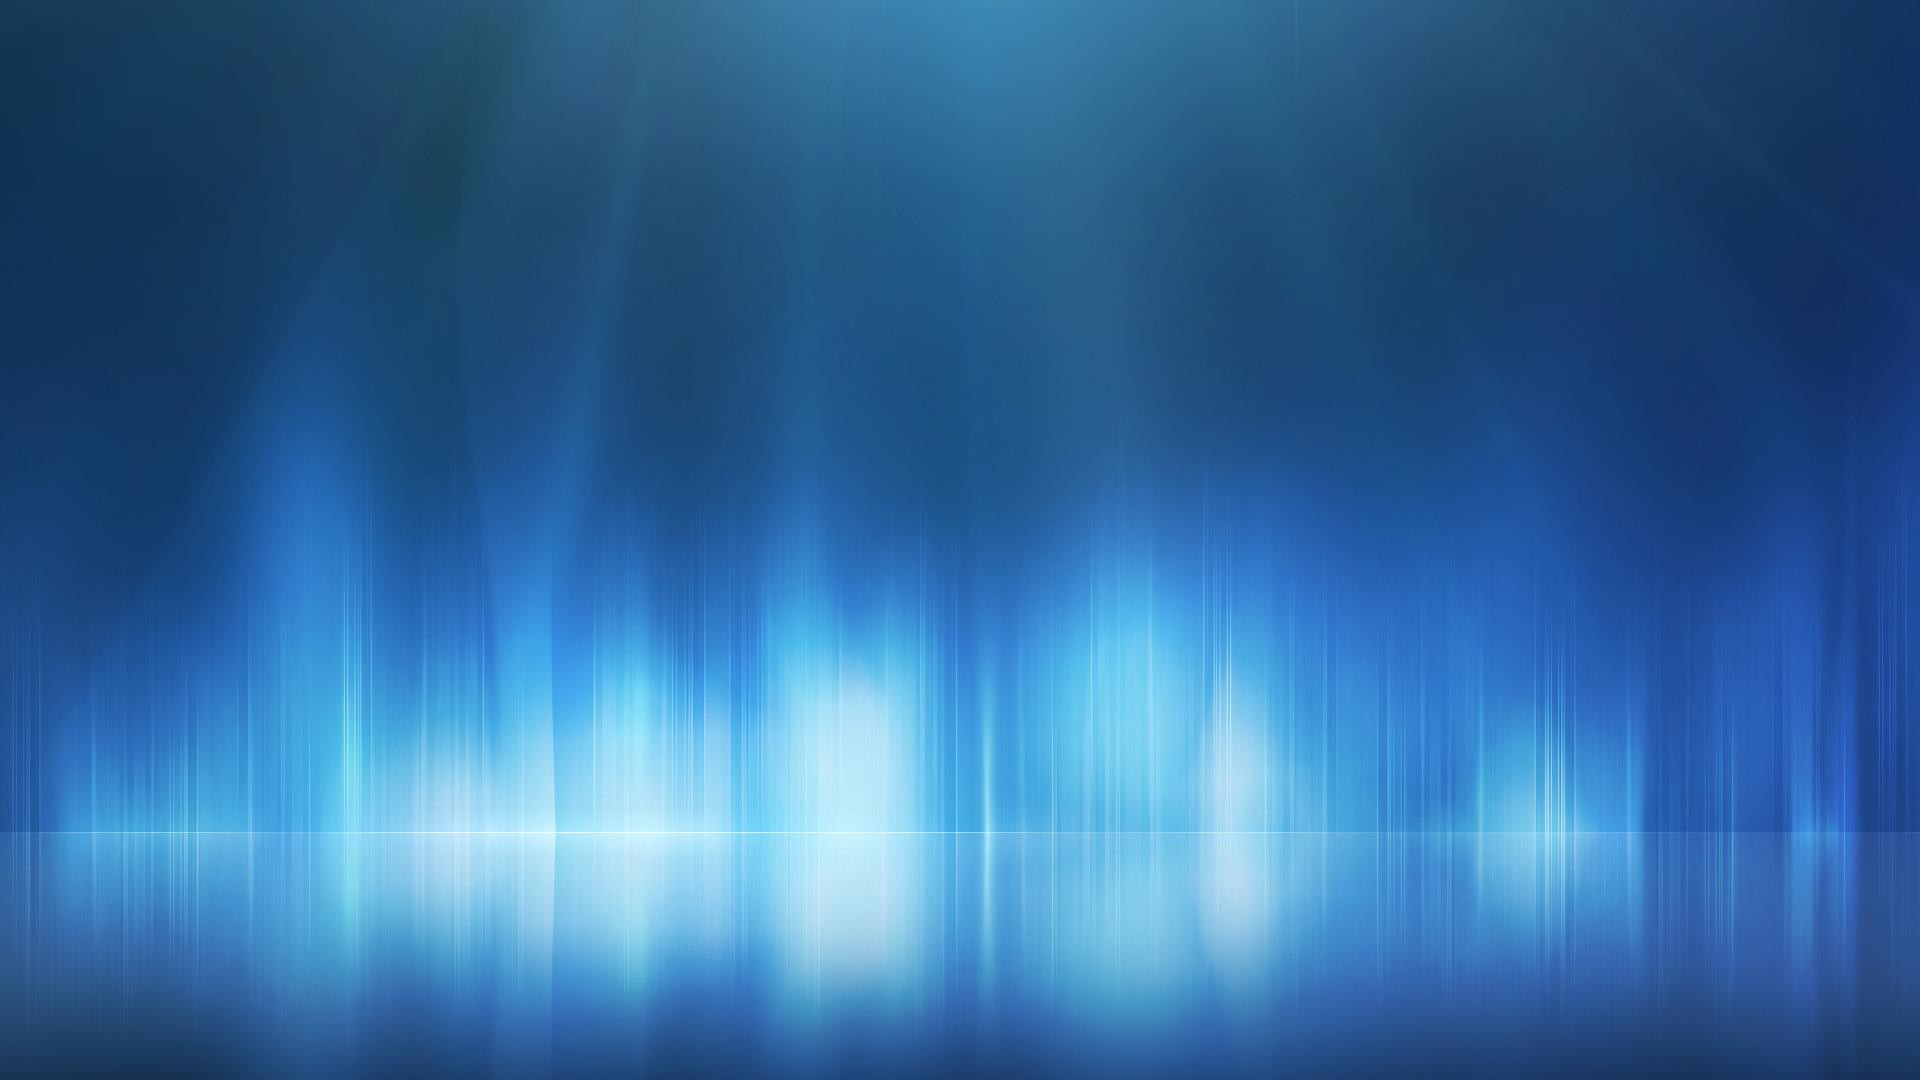 1920x1080  hd Blue dazzle light background for imac wide wallpapers :1280x800,1440x900,1680x1050